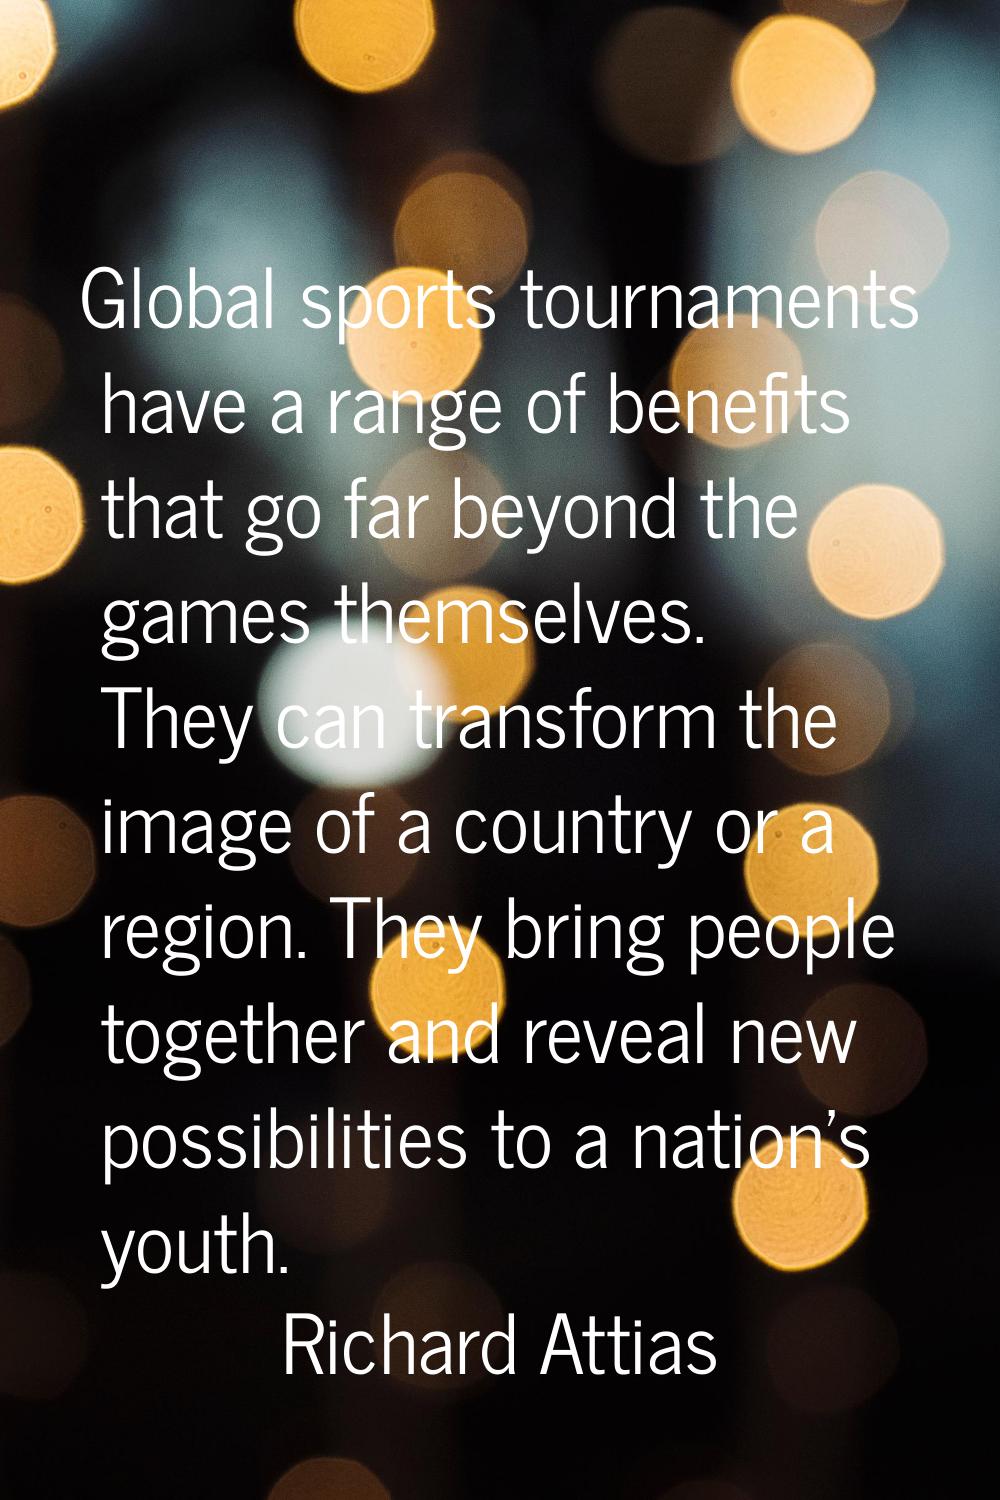 Global sports tournaments have a range of benefits that go far beyond the games themselves. They ca